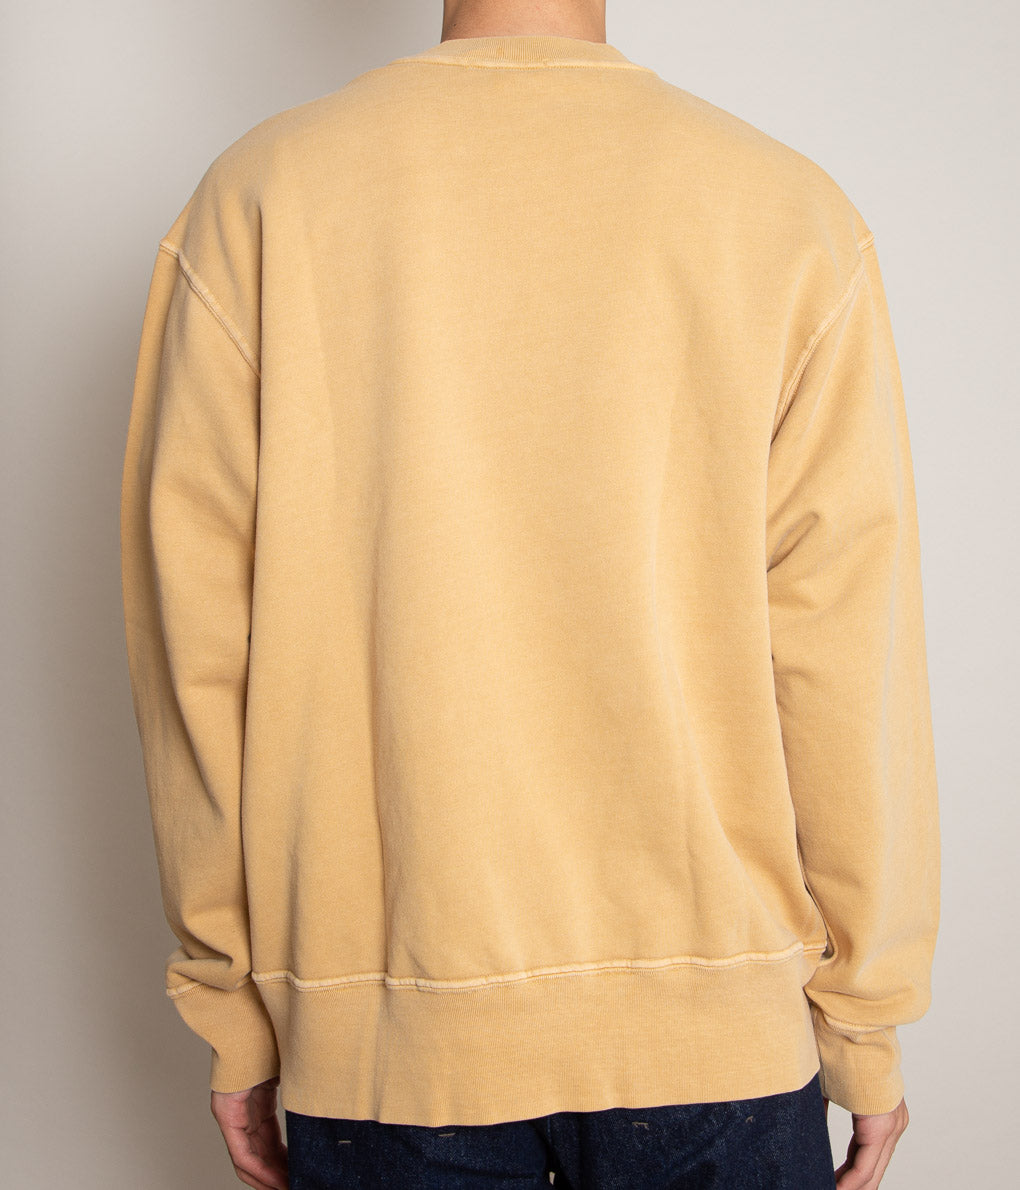 LADY WHITE CO. "RELAXED SWEATSHIRT"(MUSTERD PIGMENT)